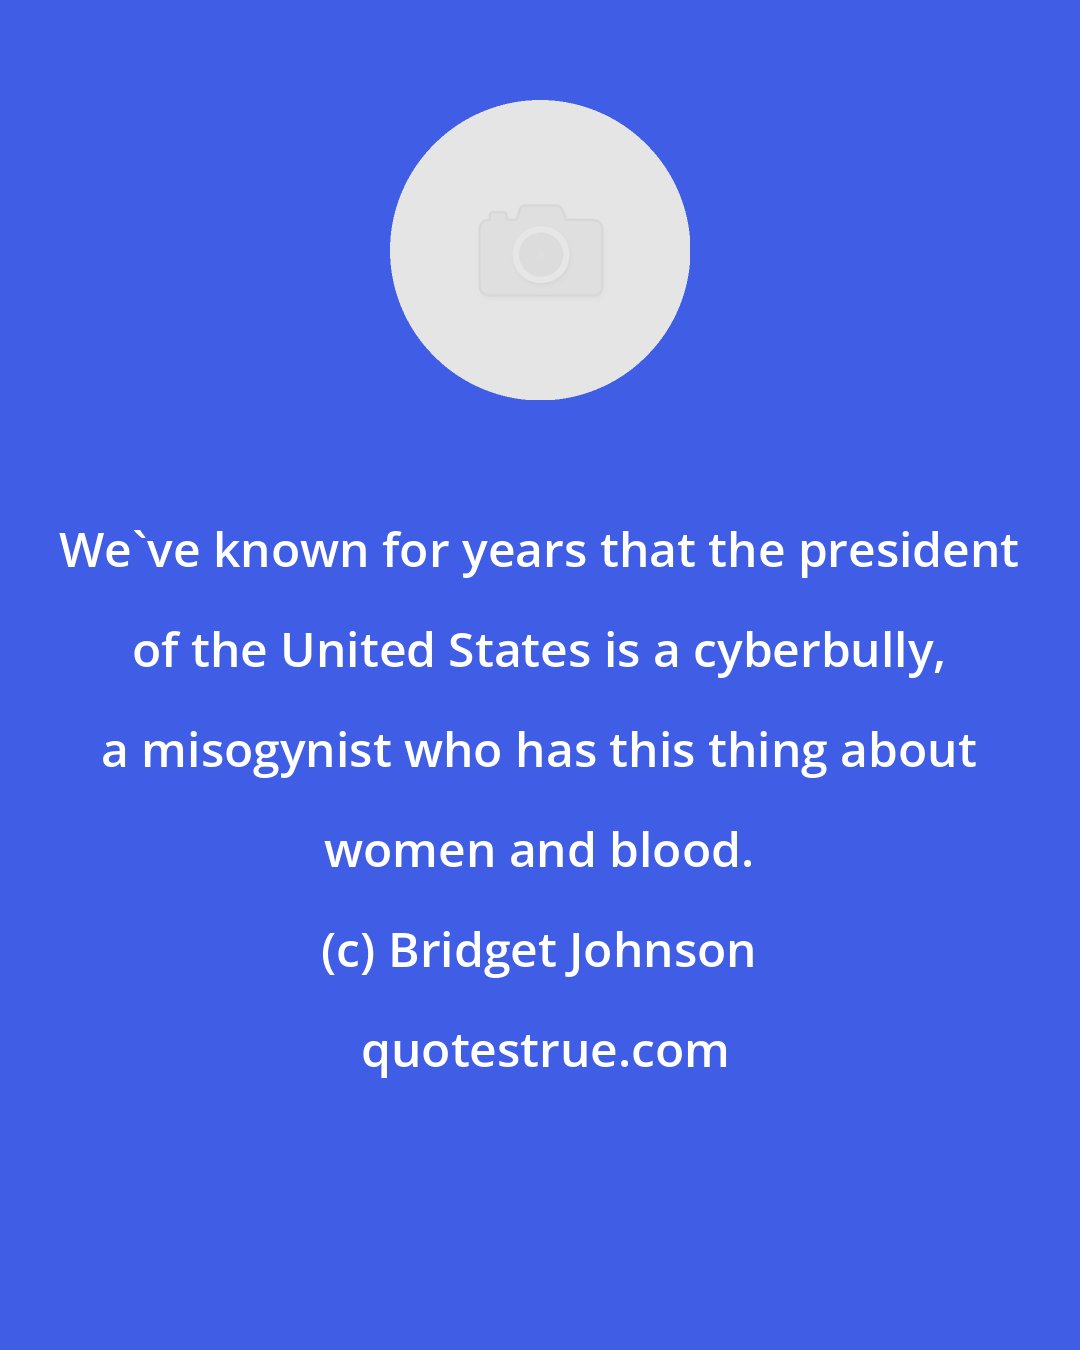 Bridget Johnson: We've known for years that the president of the United States is a cyberbully, a misogynist who has this thing about women and blood.